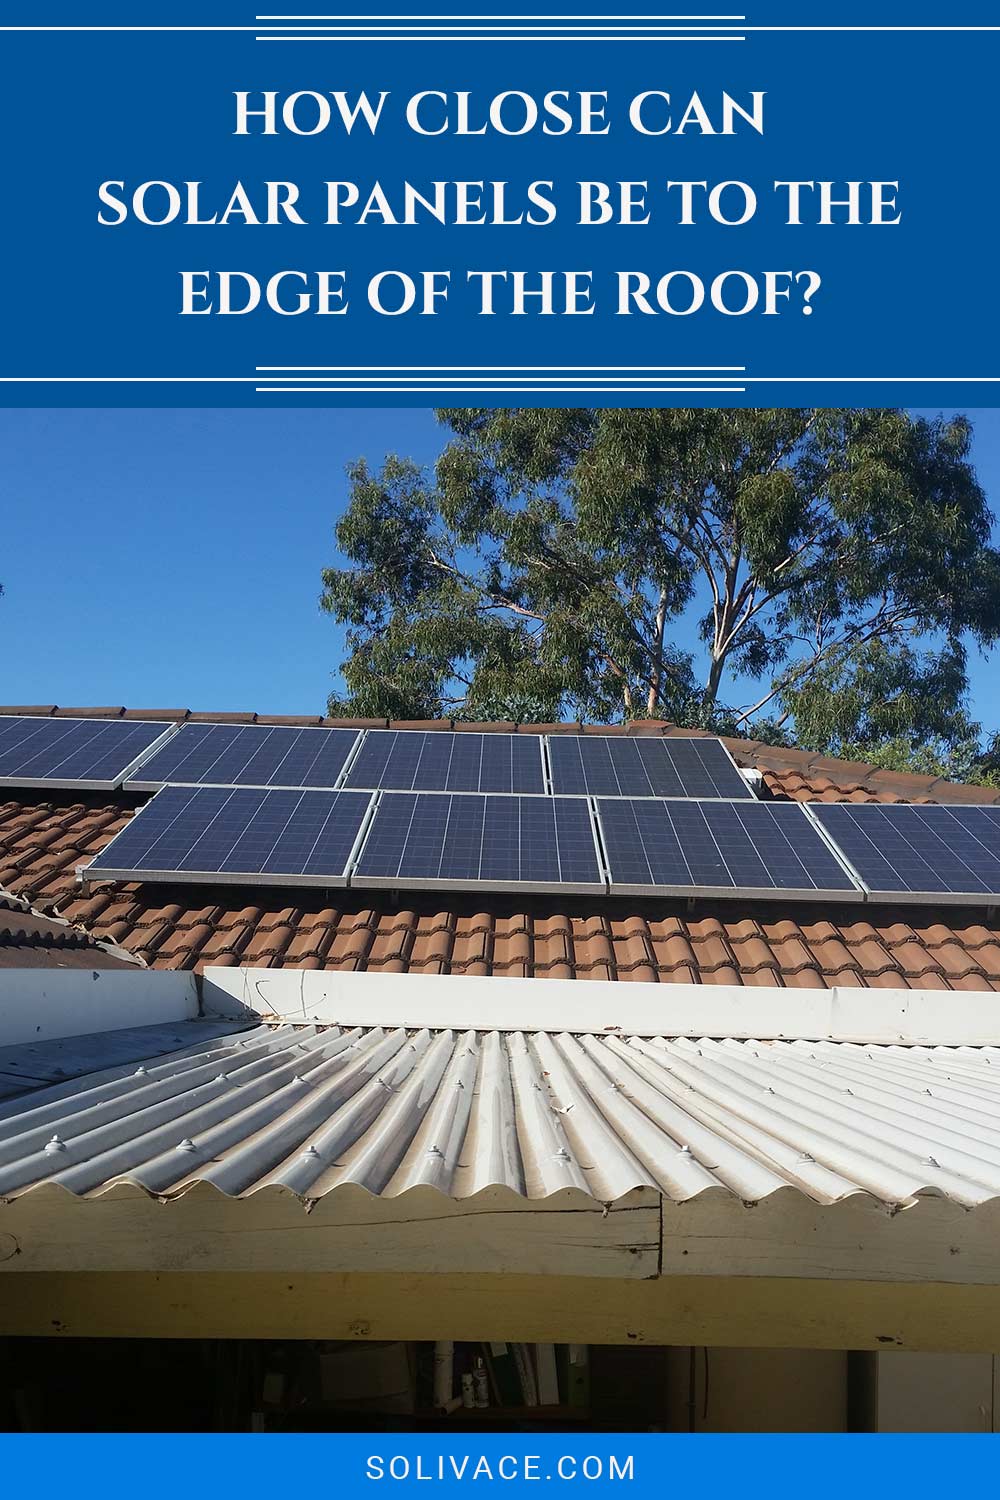 How Close Can Solar Panels Be To The Edge Of The Roof?